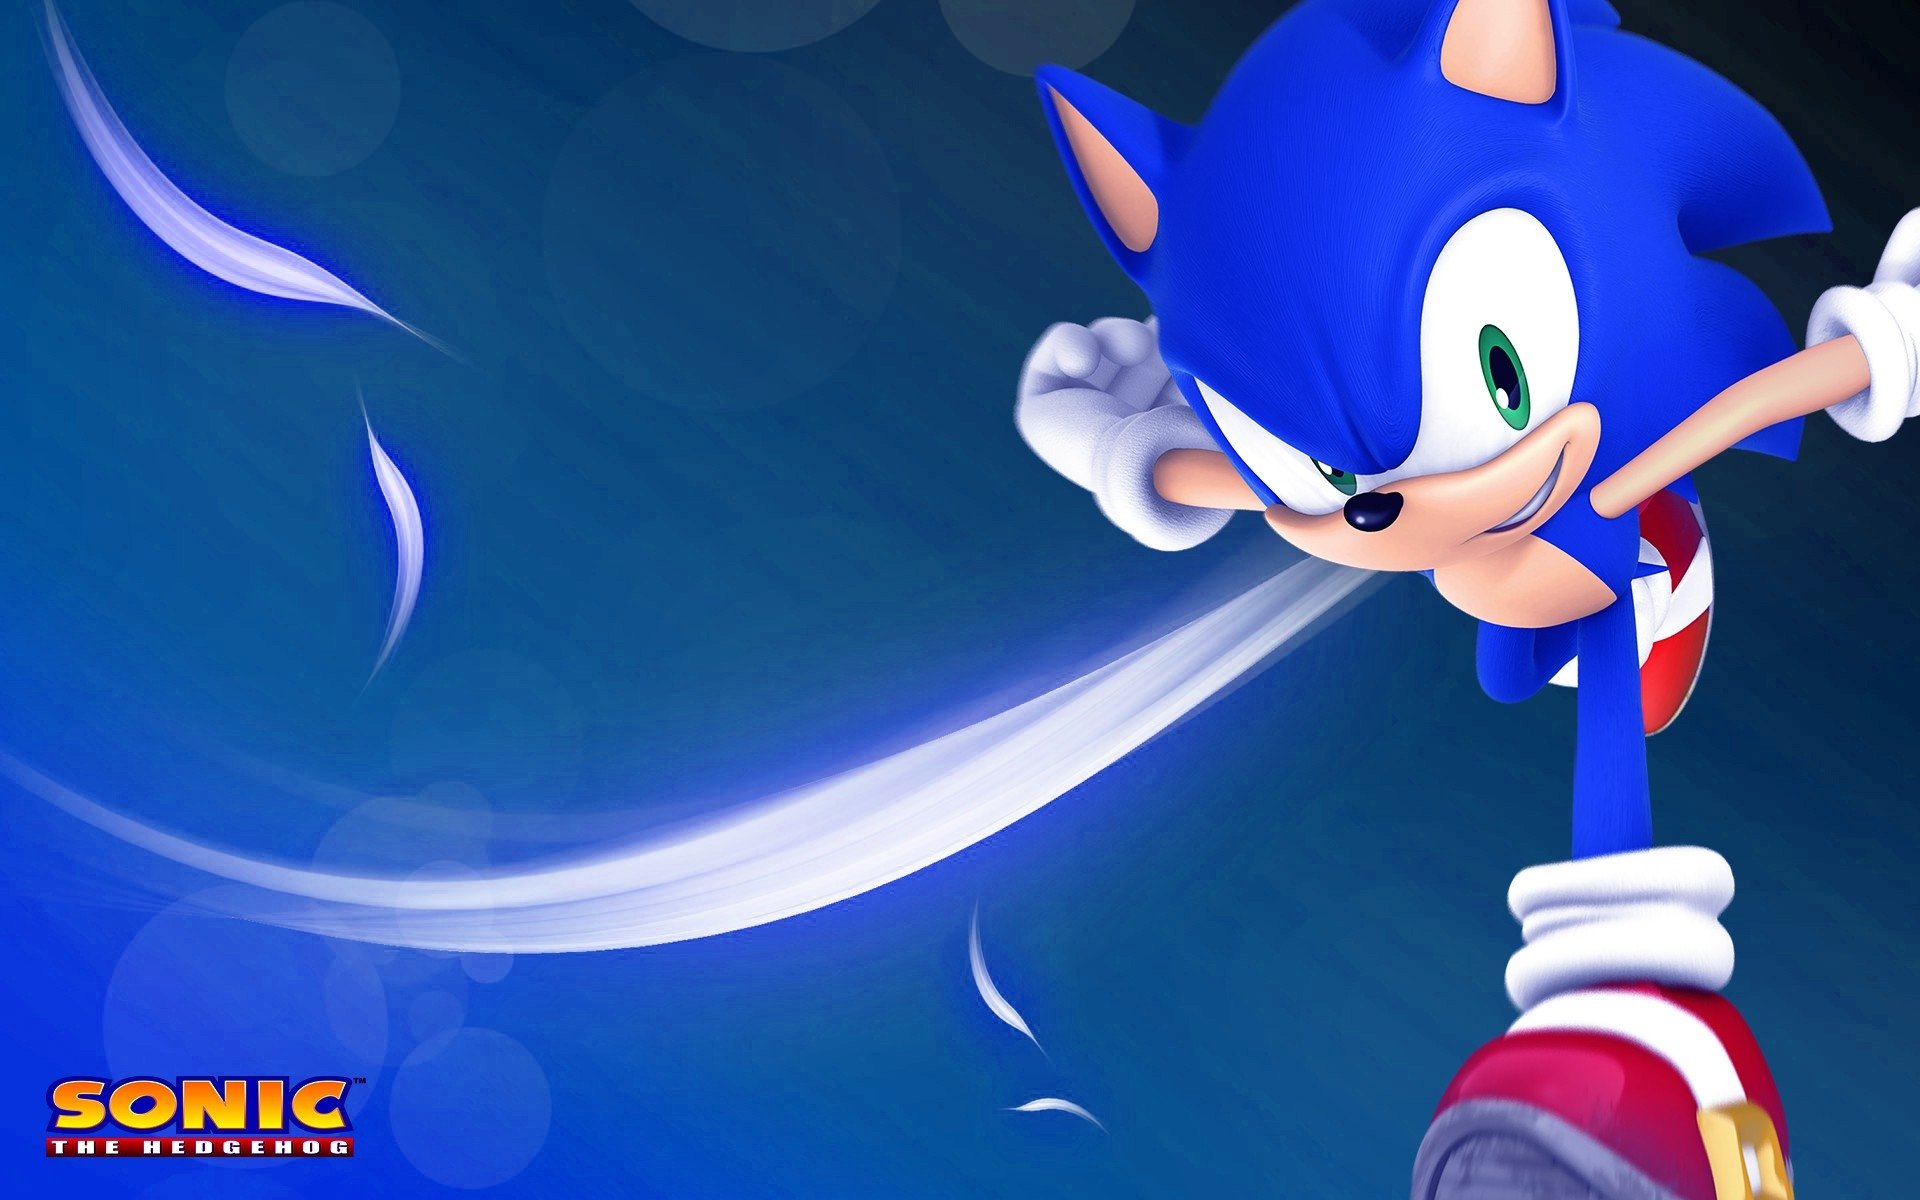 Sonic Colors Background